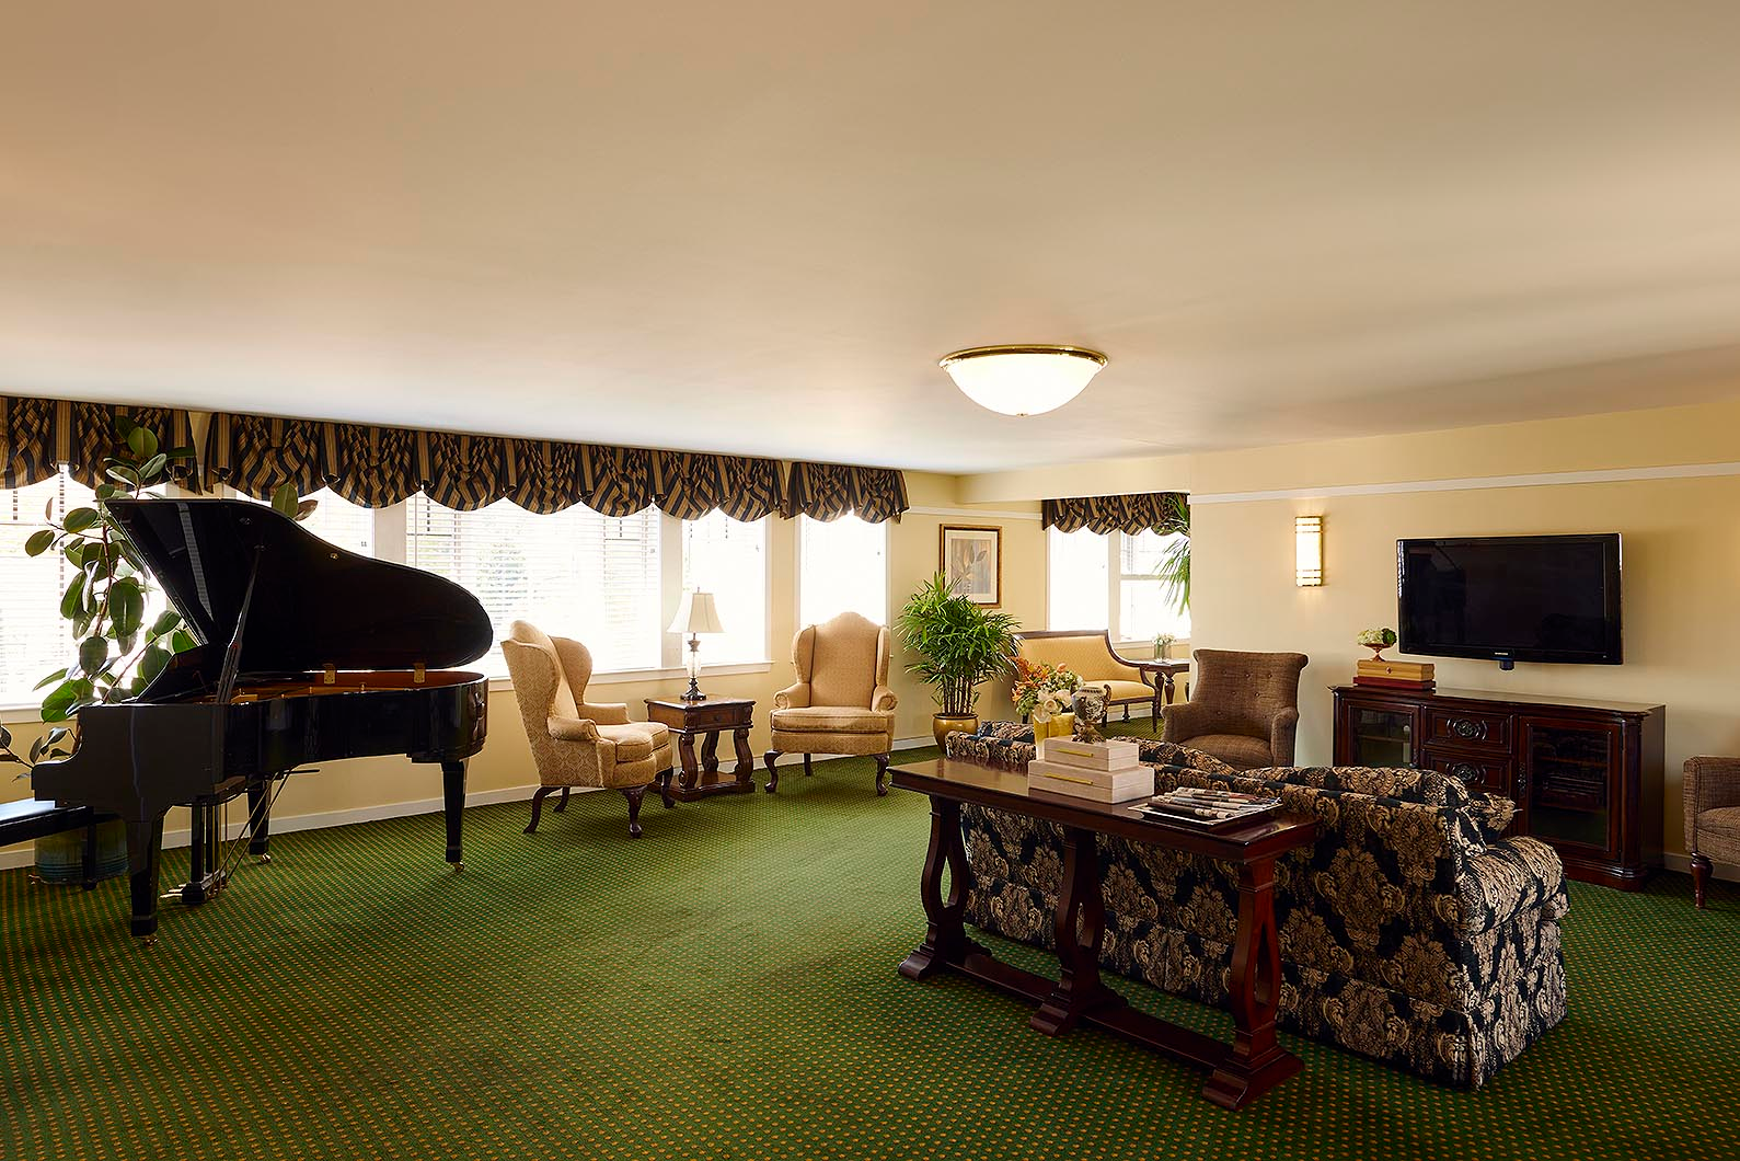 A baby grand piano, TV screen and seating in the sitting room